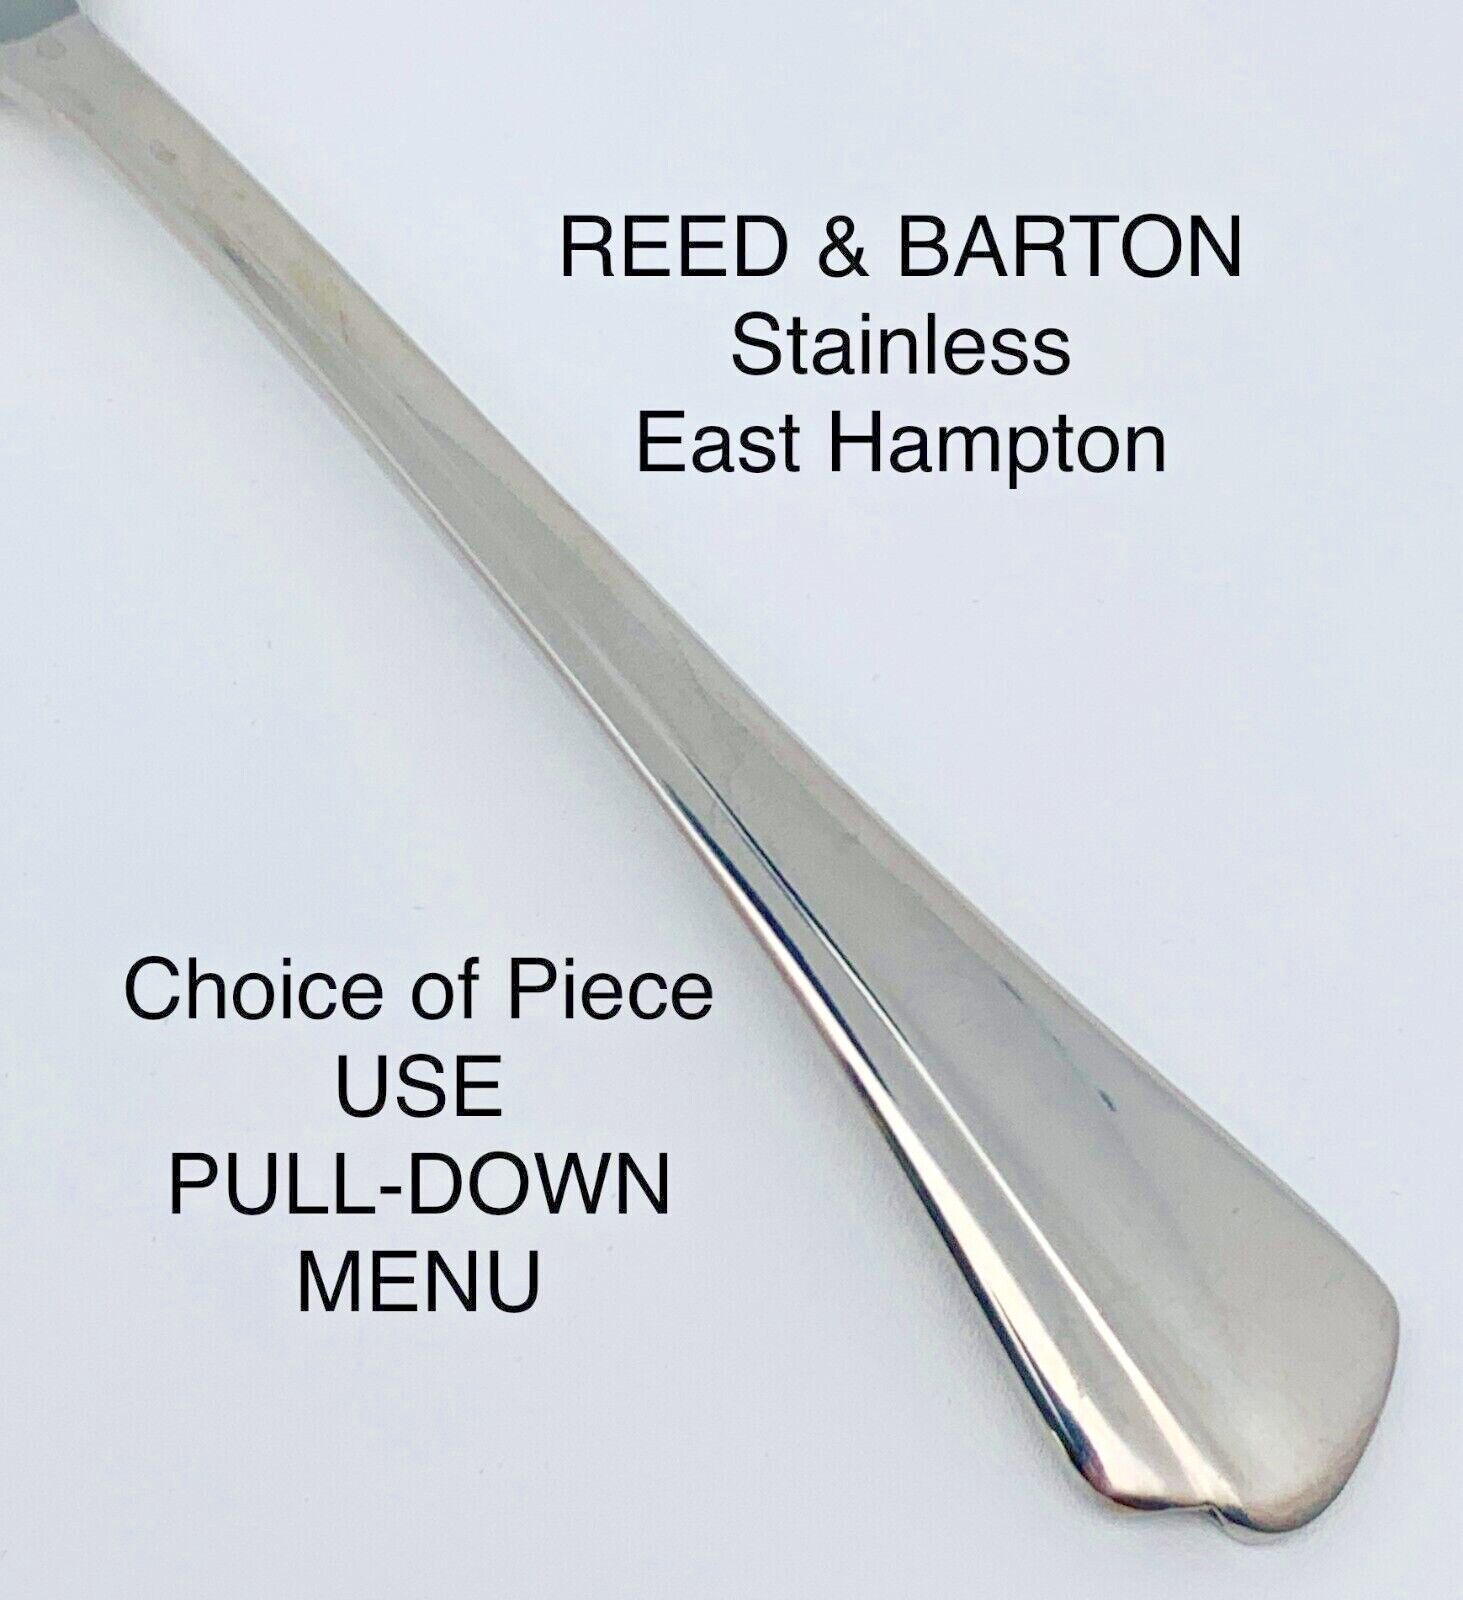 EAST HAMPTON Stainless REED & BARTON *Choice of Piece* Glossy China (INV22-977) - $6.60 - $15.20